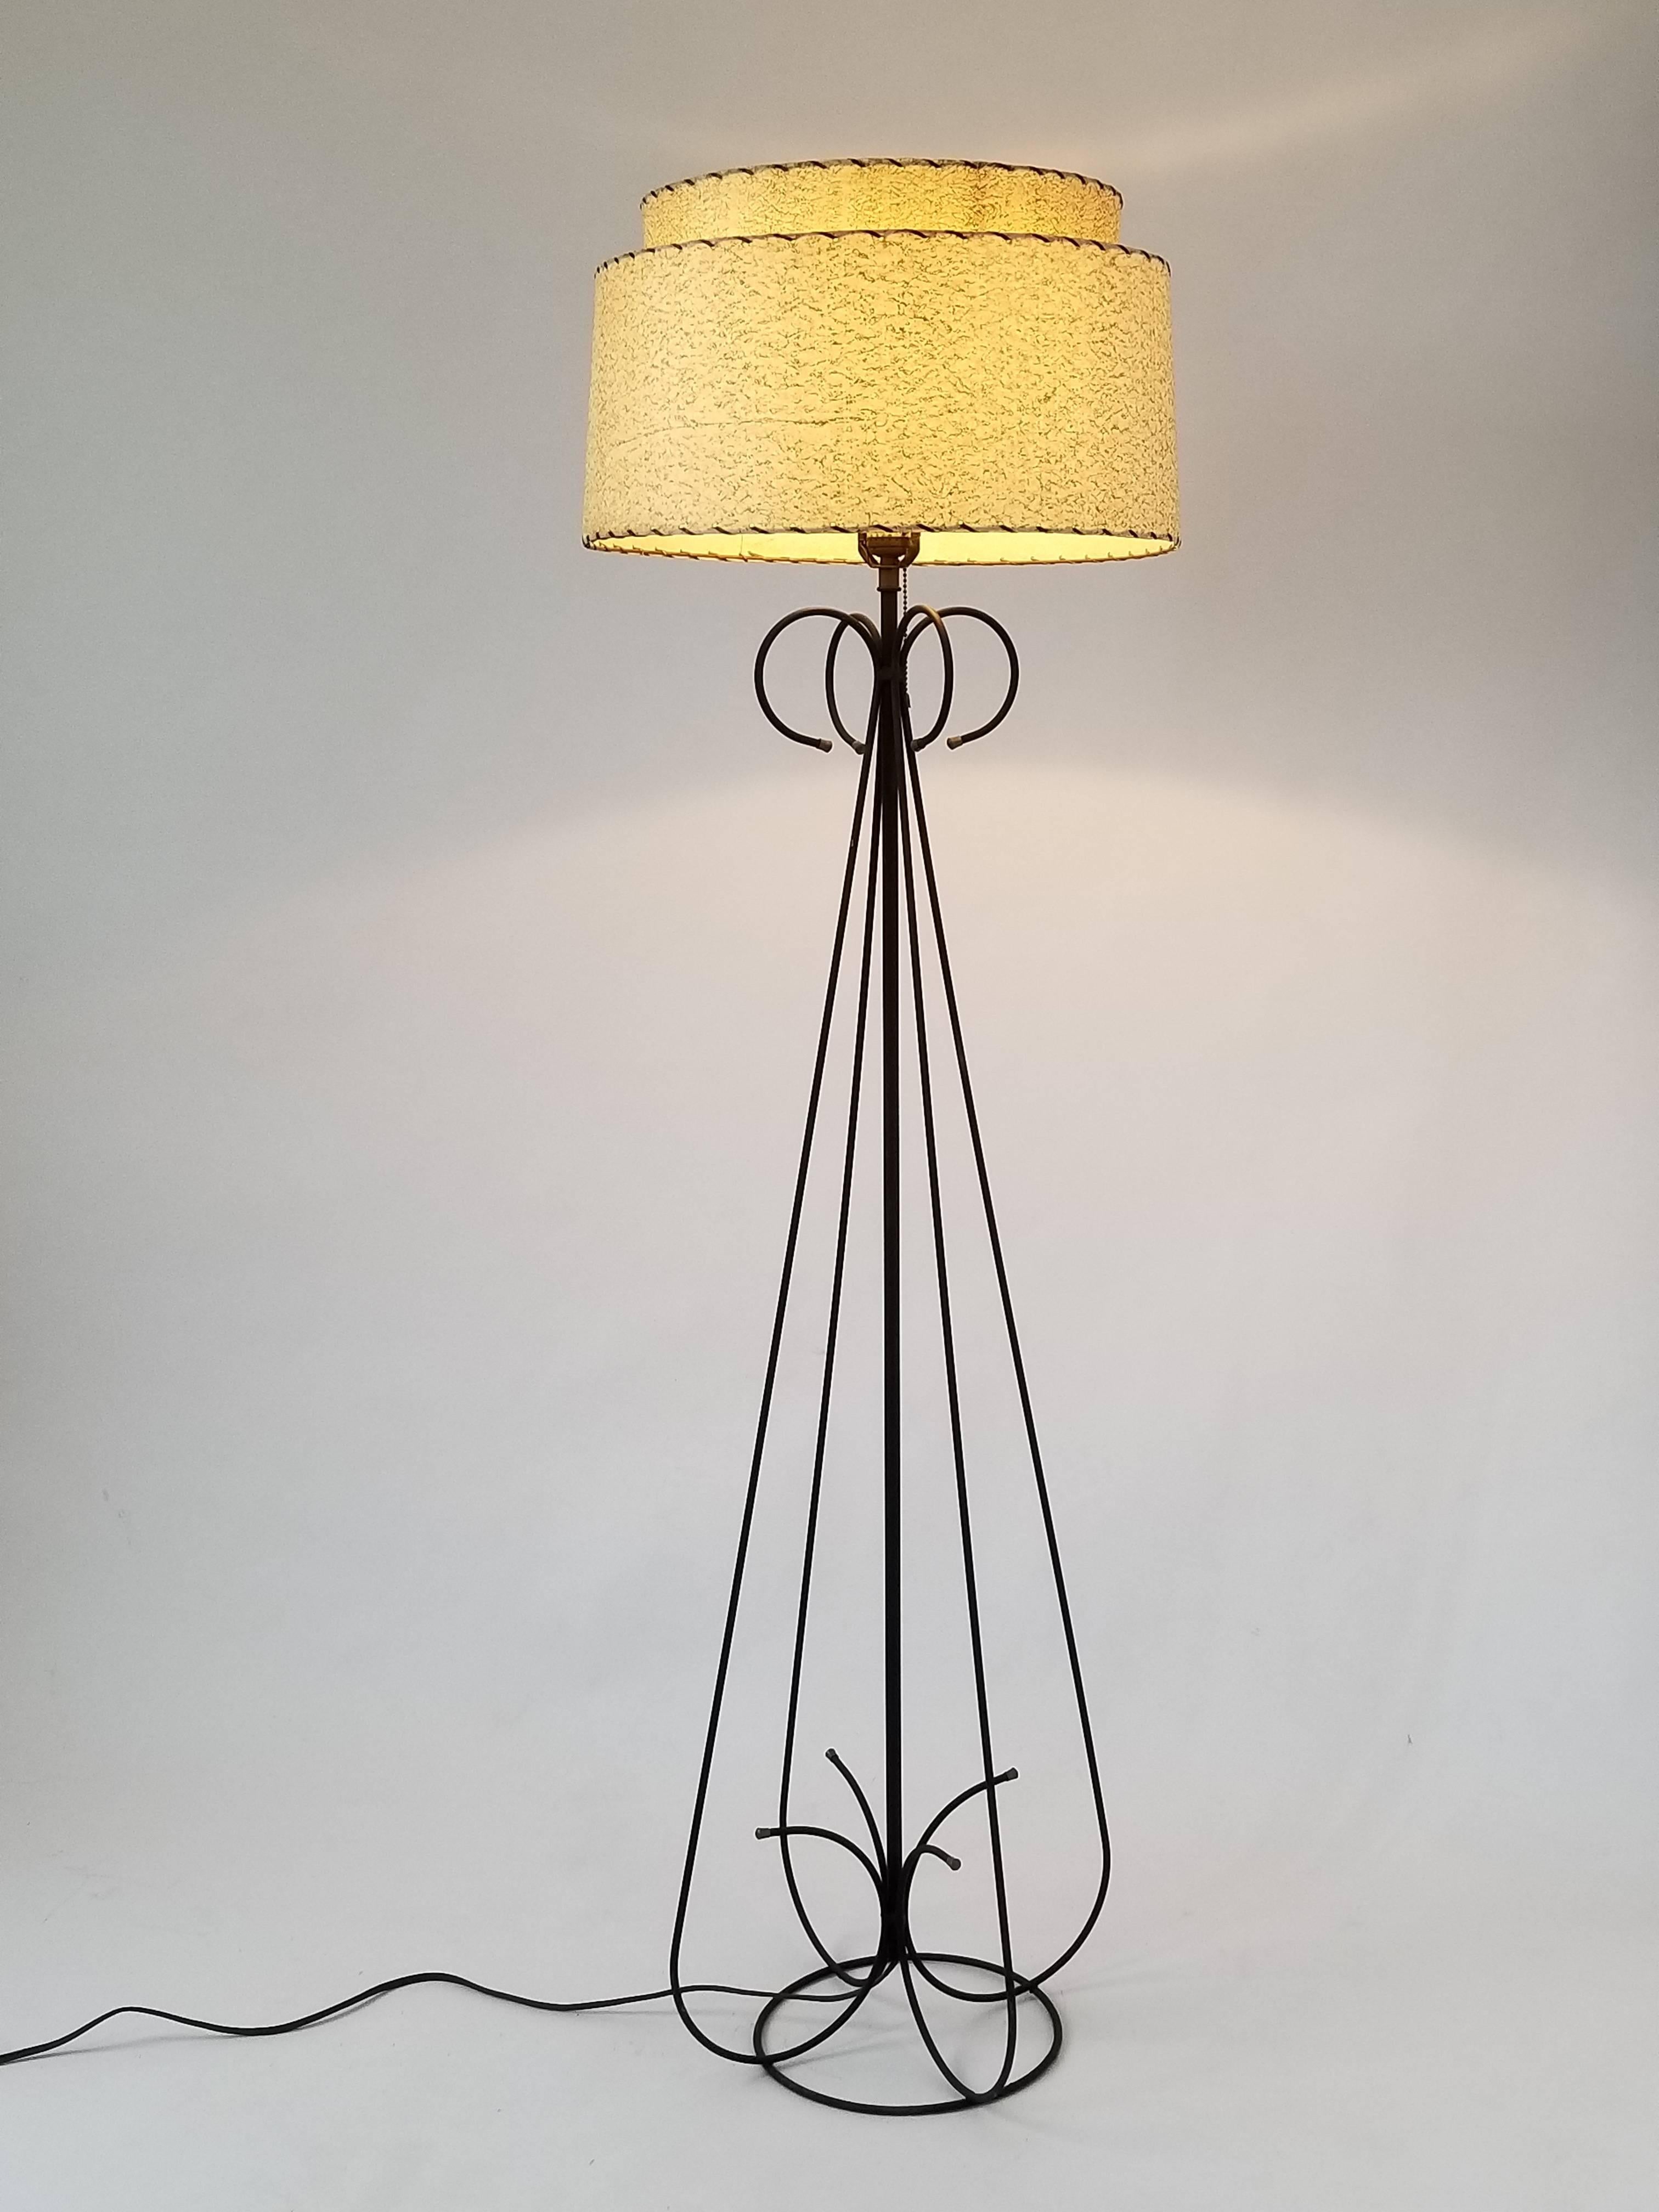 Mid-20th Century 1950s Wire Floor Lamp in the Style of Tony Paul, USA For Sale